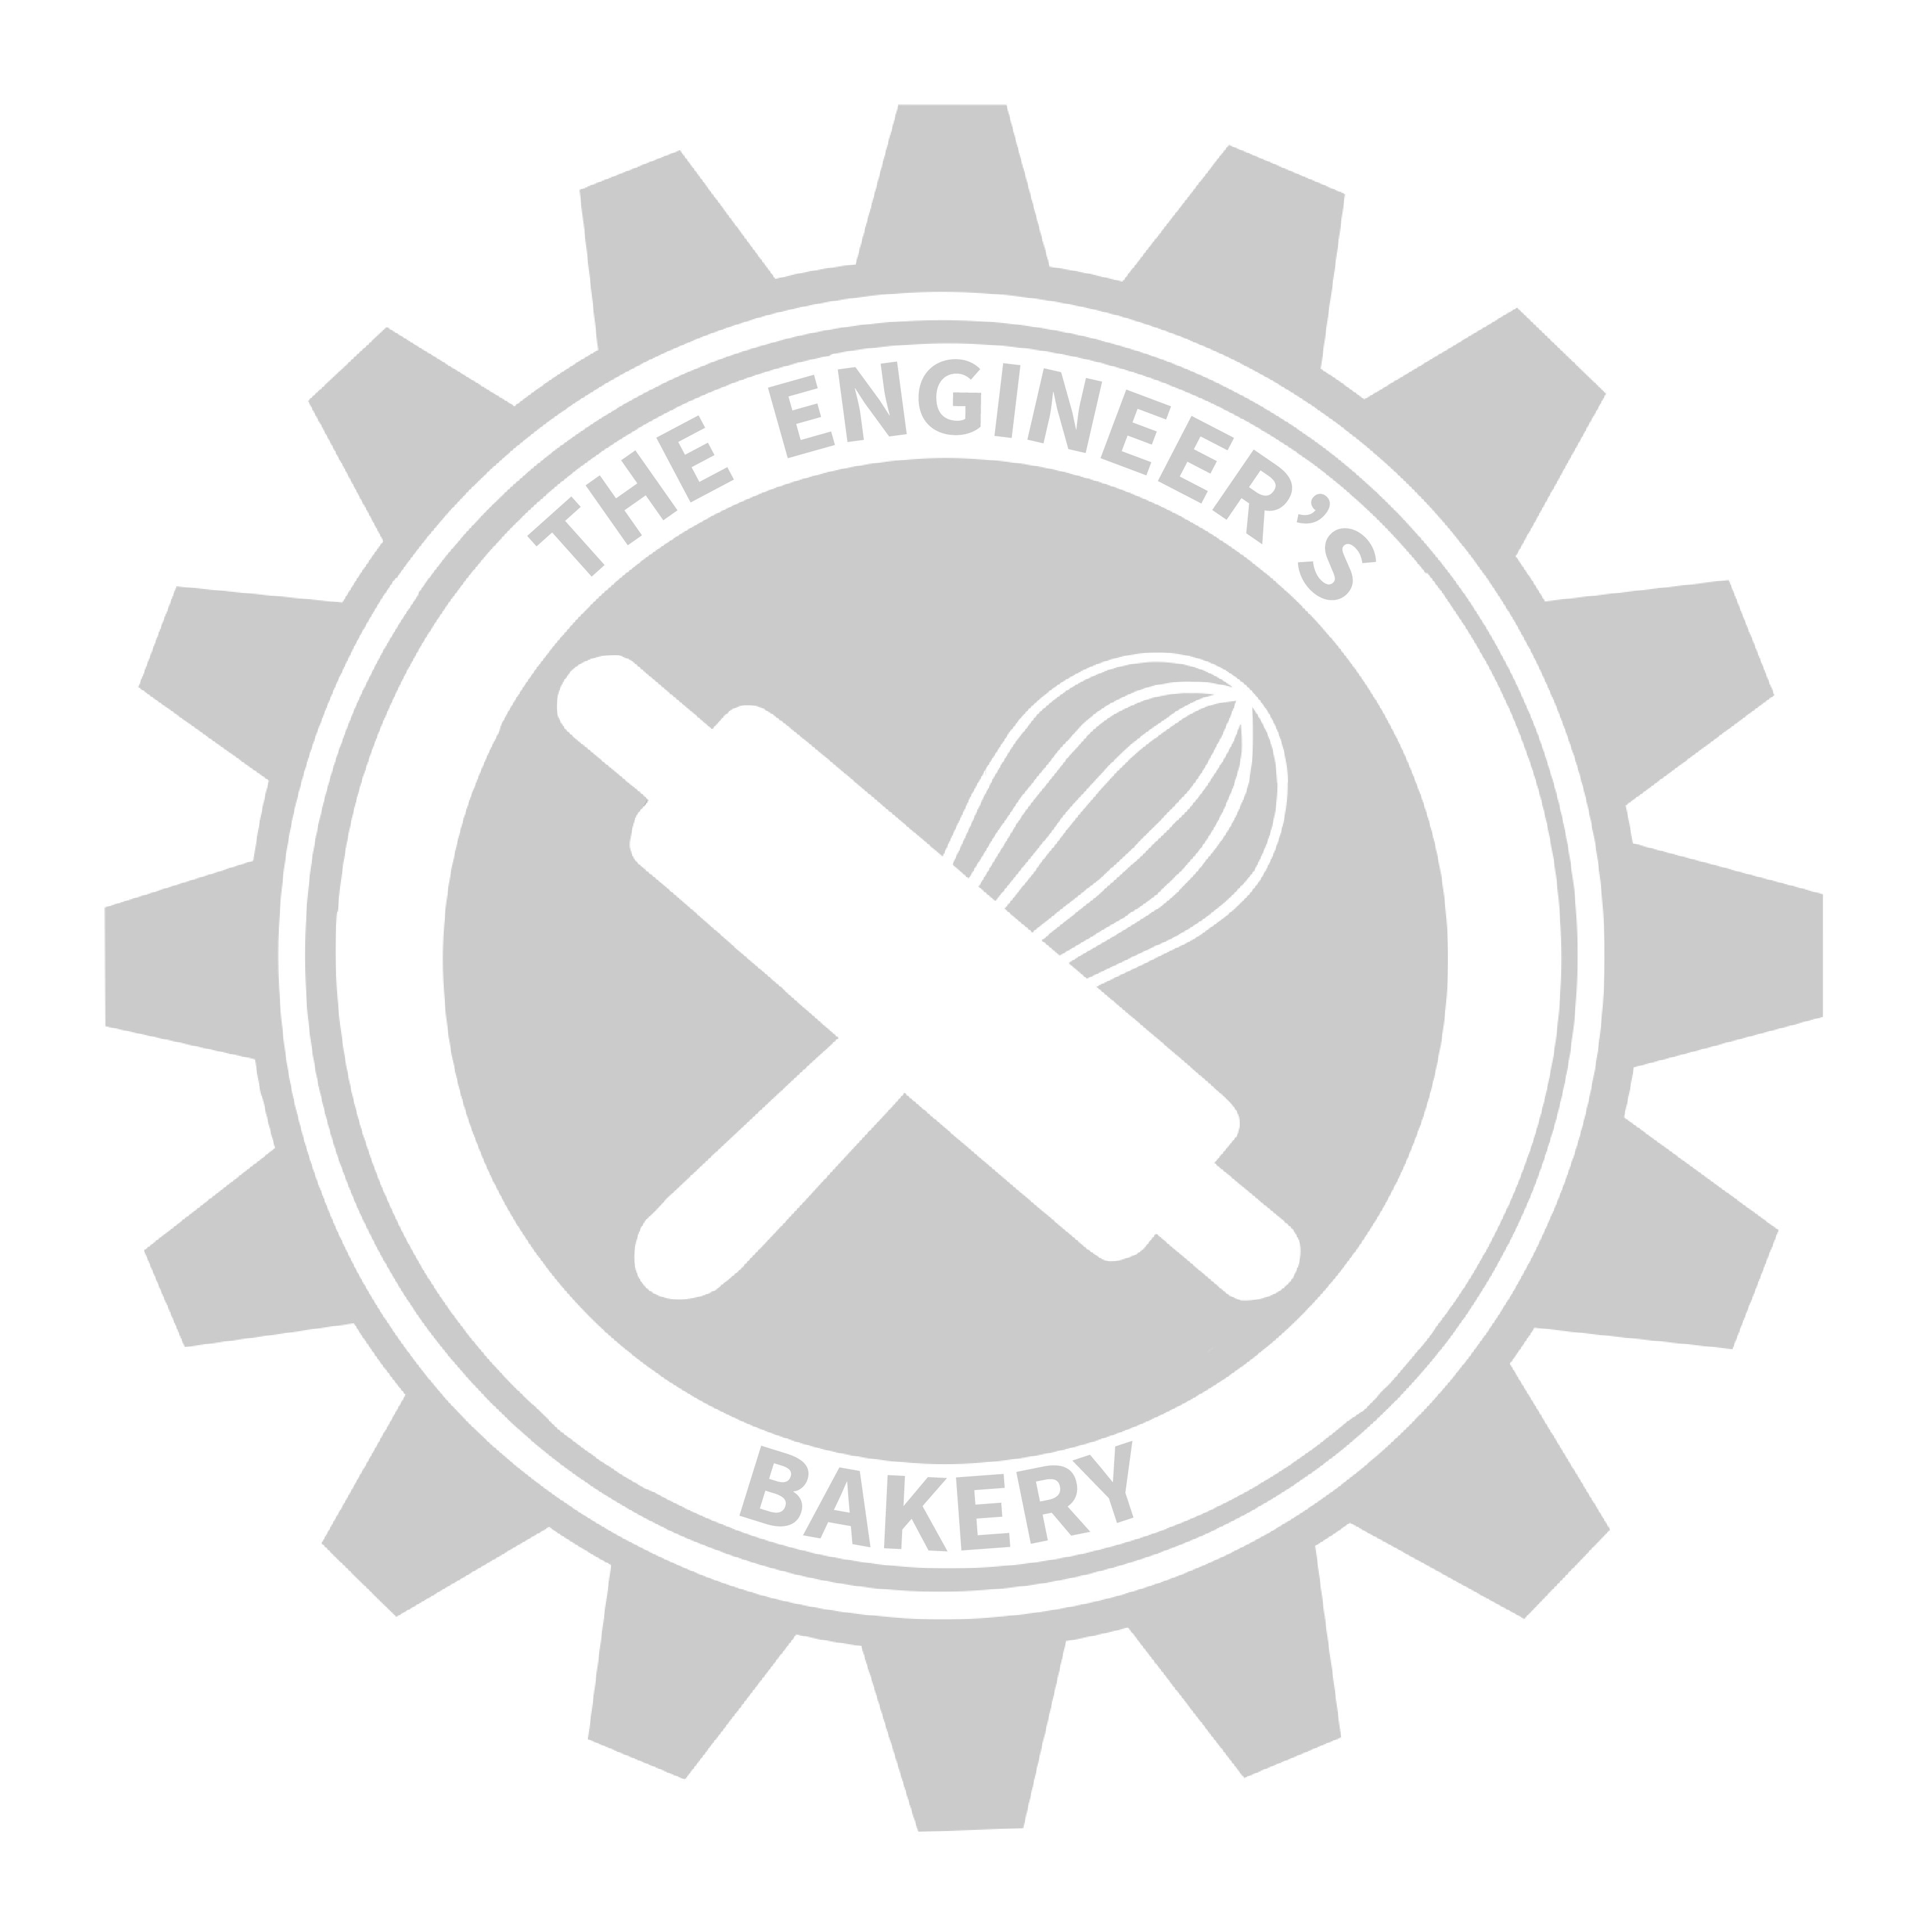 All Things Sweet - The Engineer's Bakery